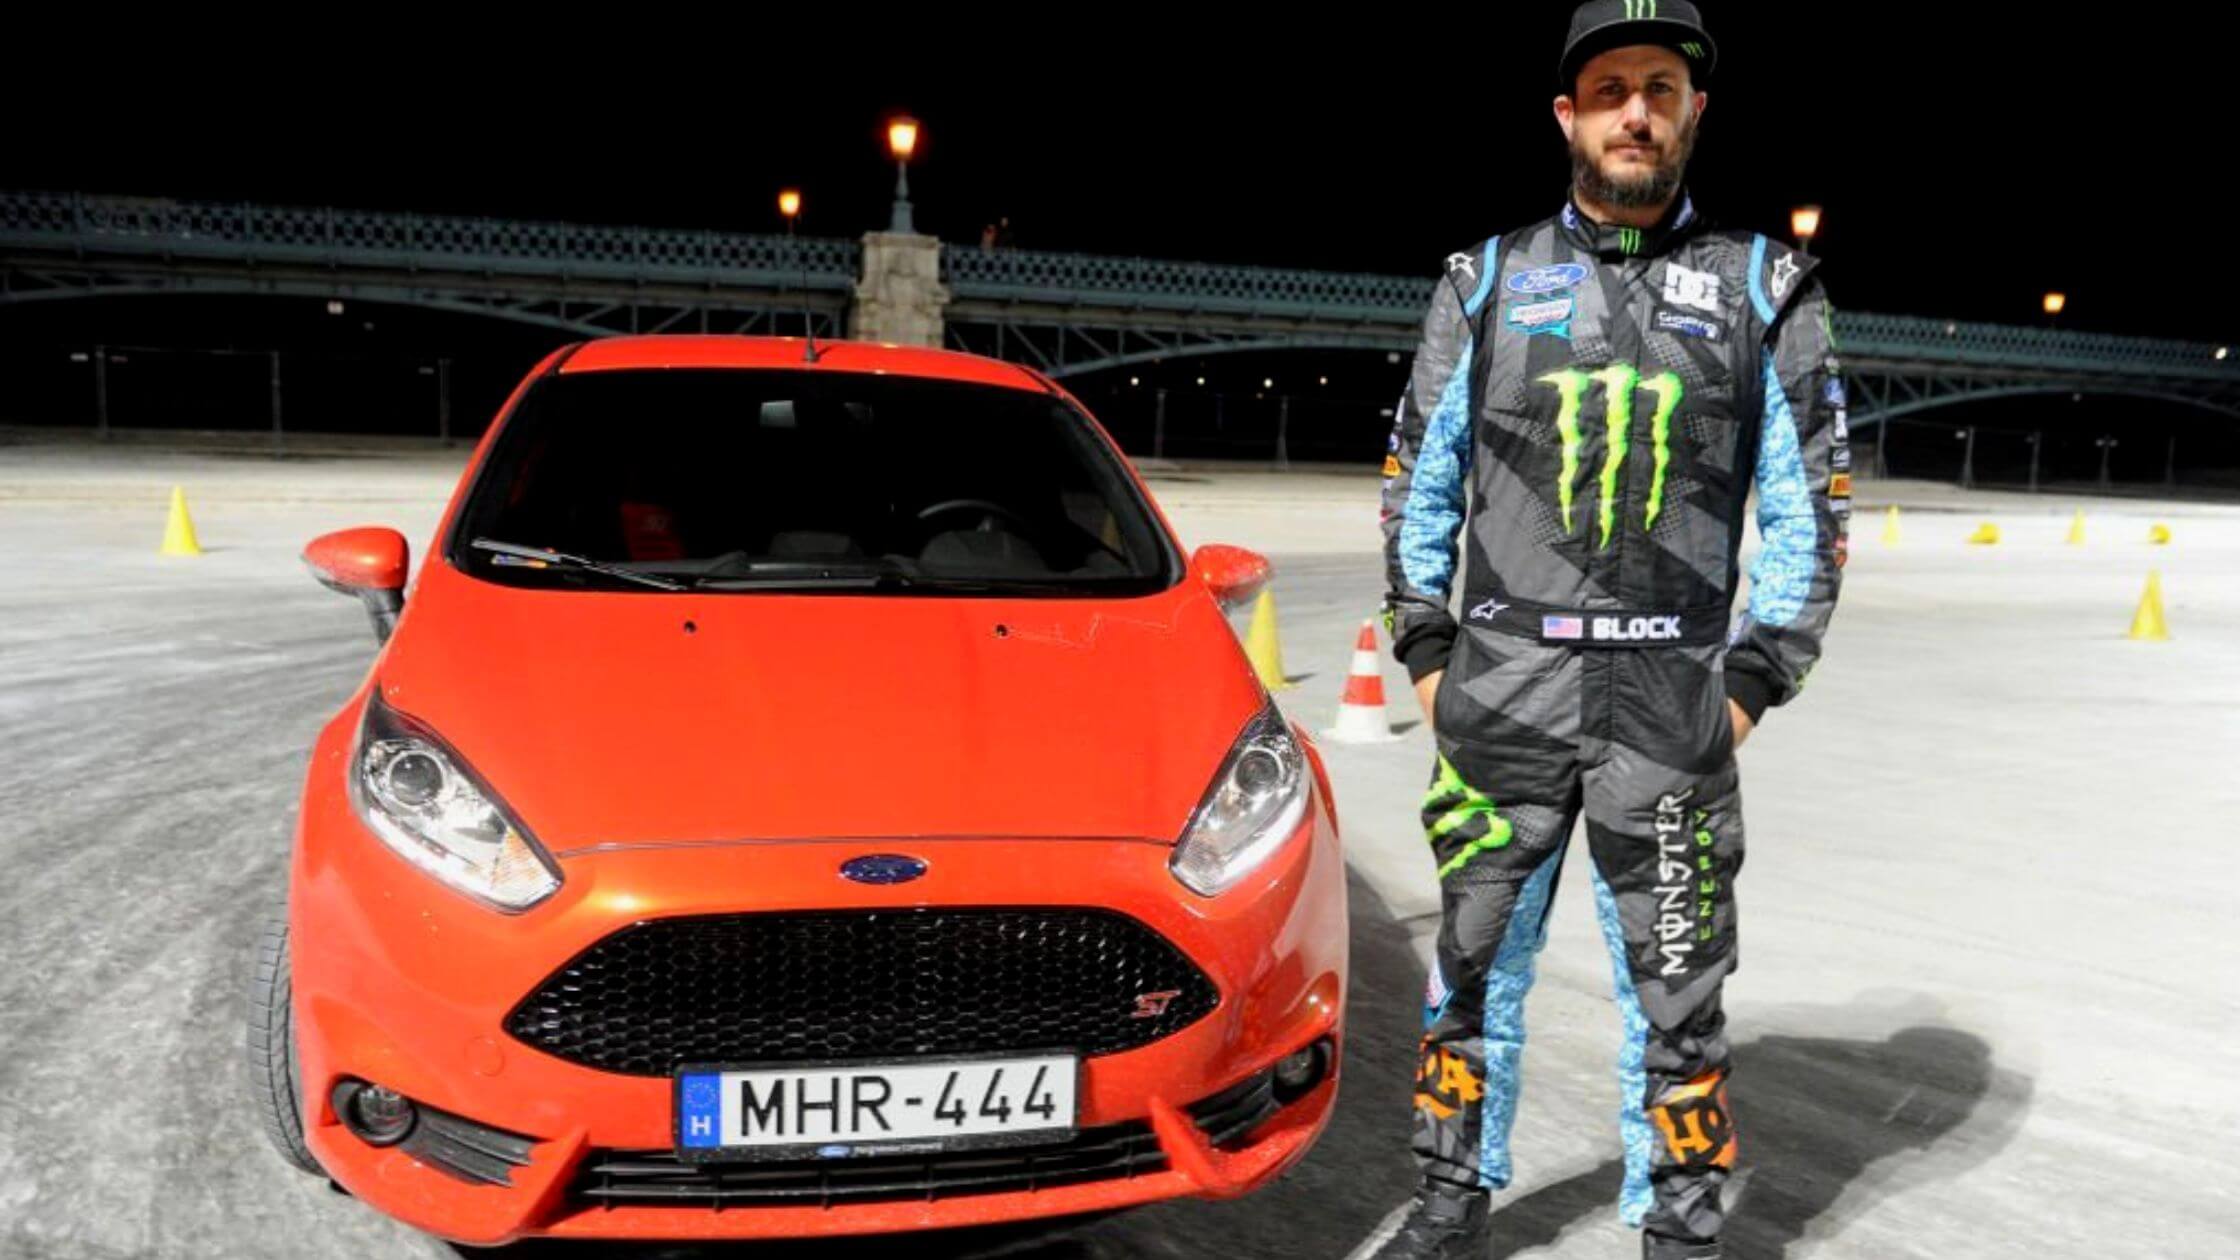 Park City Rally Driver Ken Block Was Killed In A Snowmobile Accident